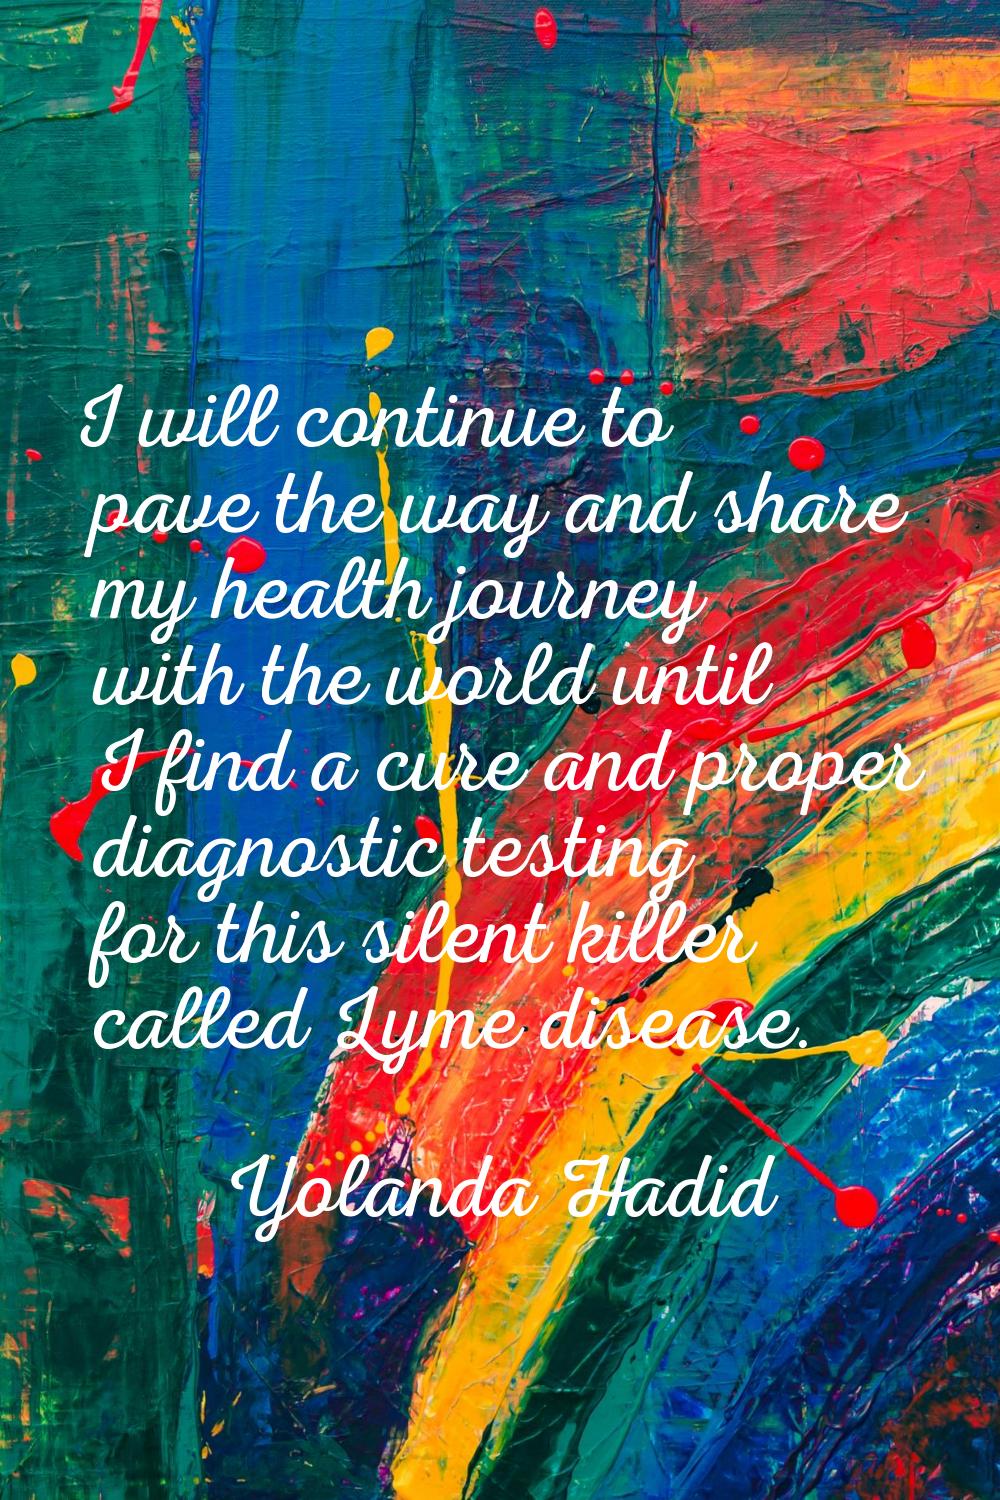 I will continue to pave the way and share my health journey with the world until I find a cure and 